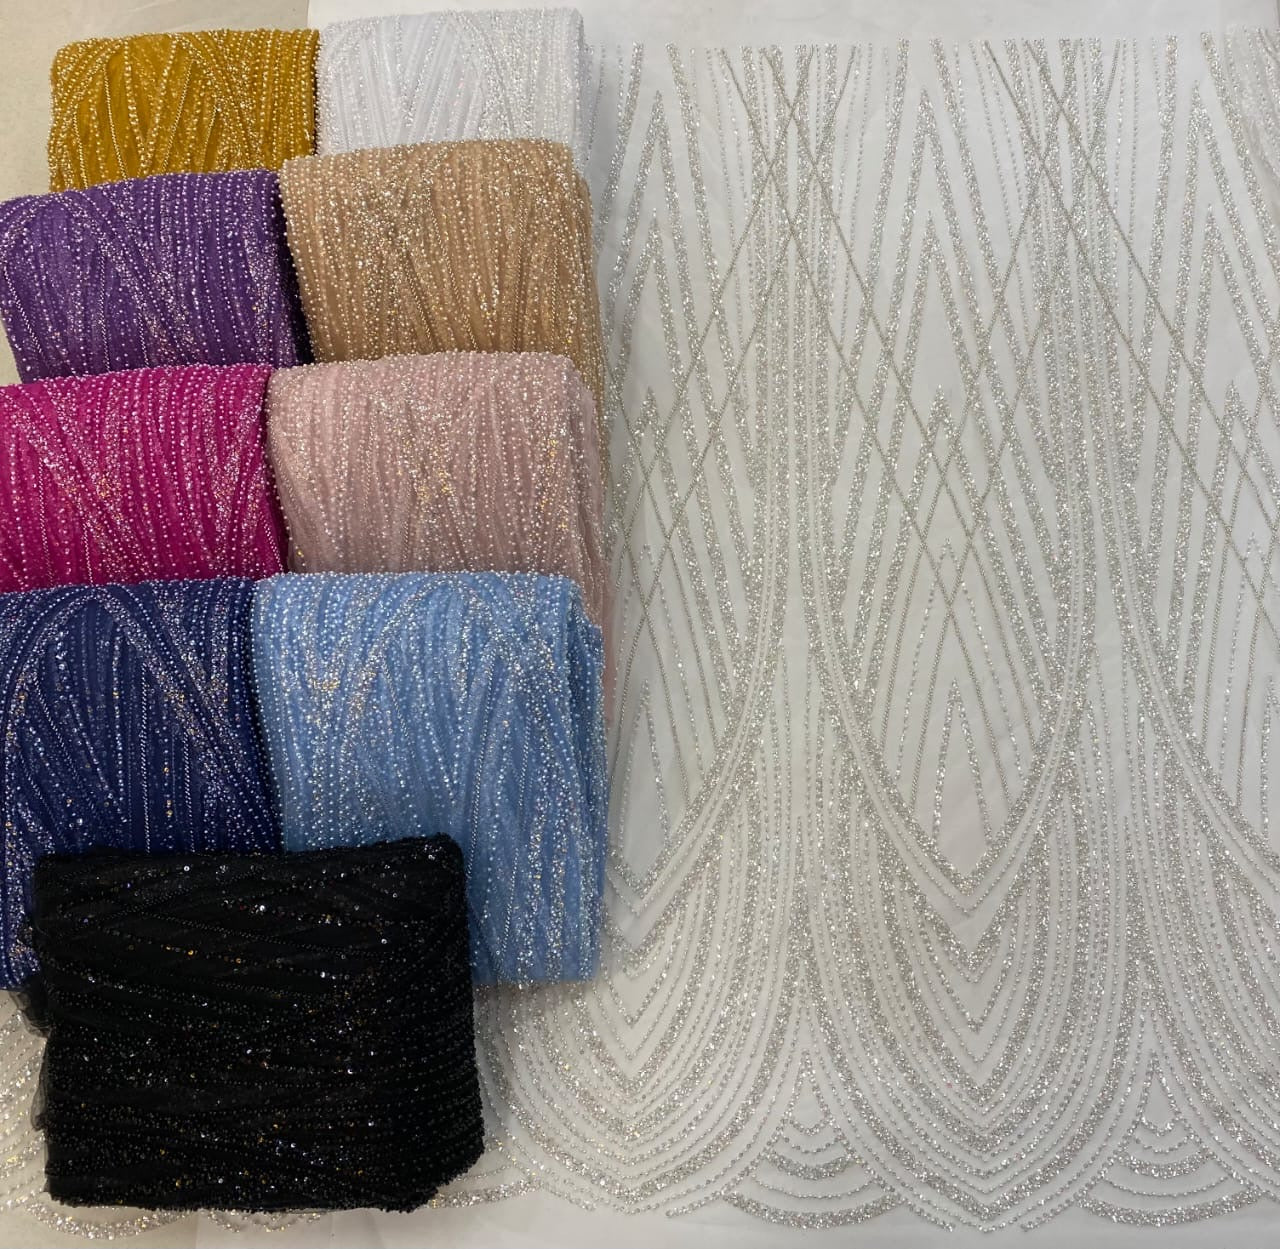 Ruxelle Beaded Luxury Fabric - More Colors